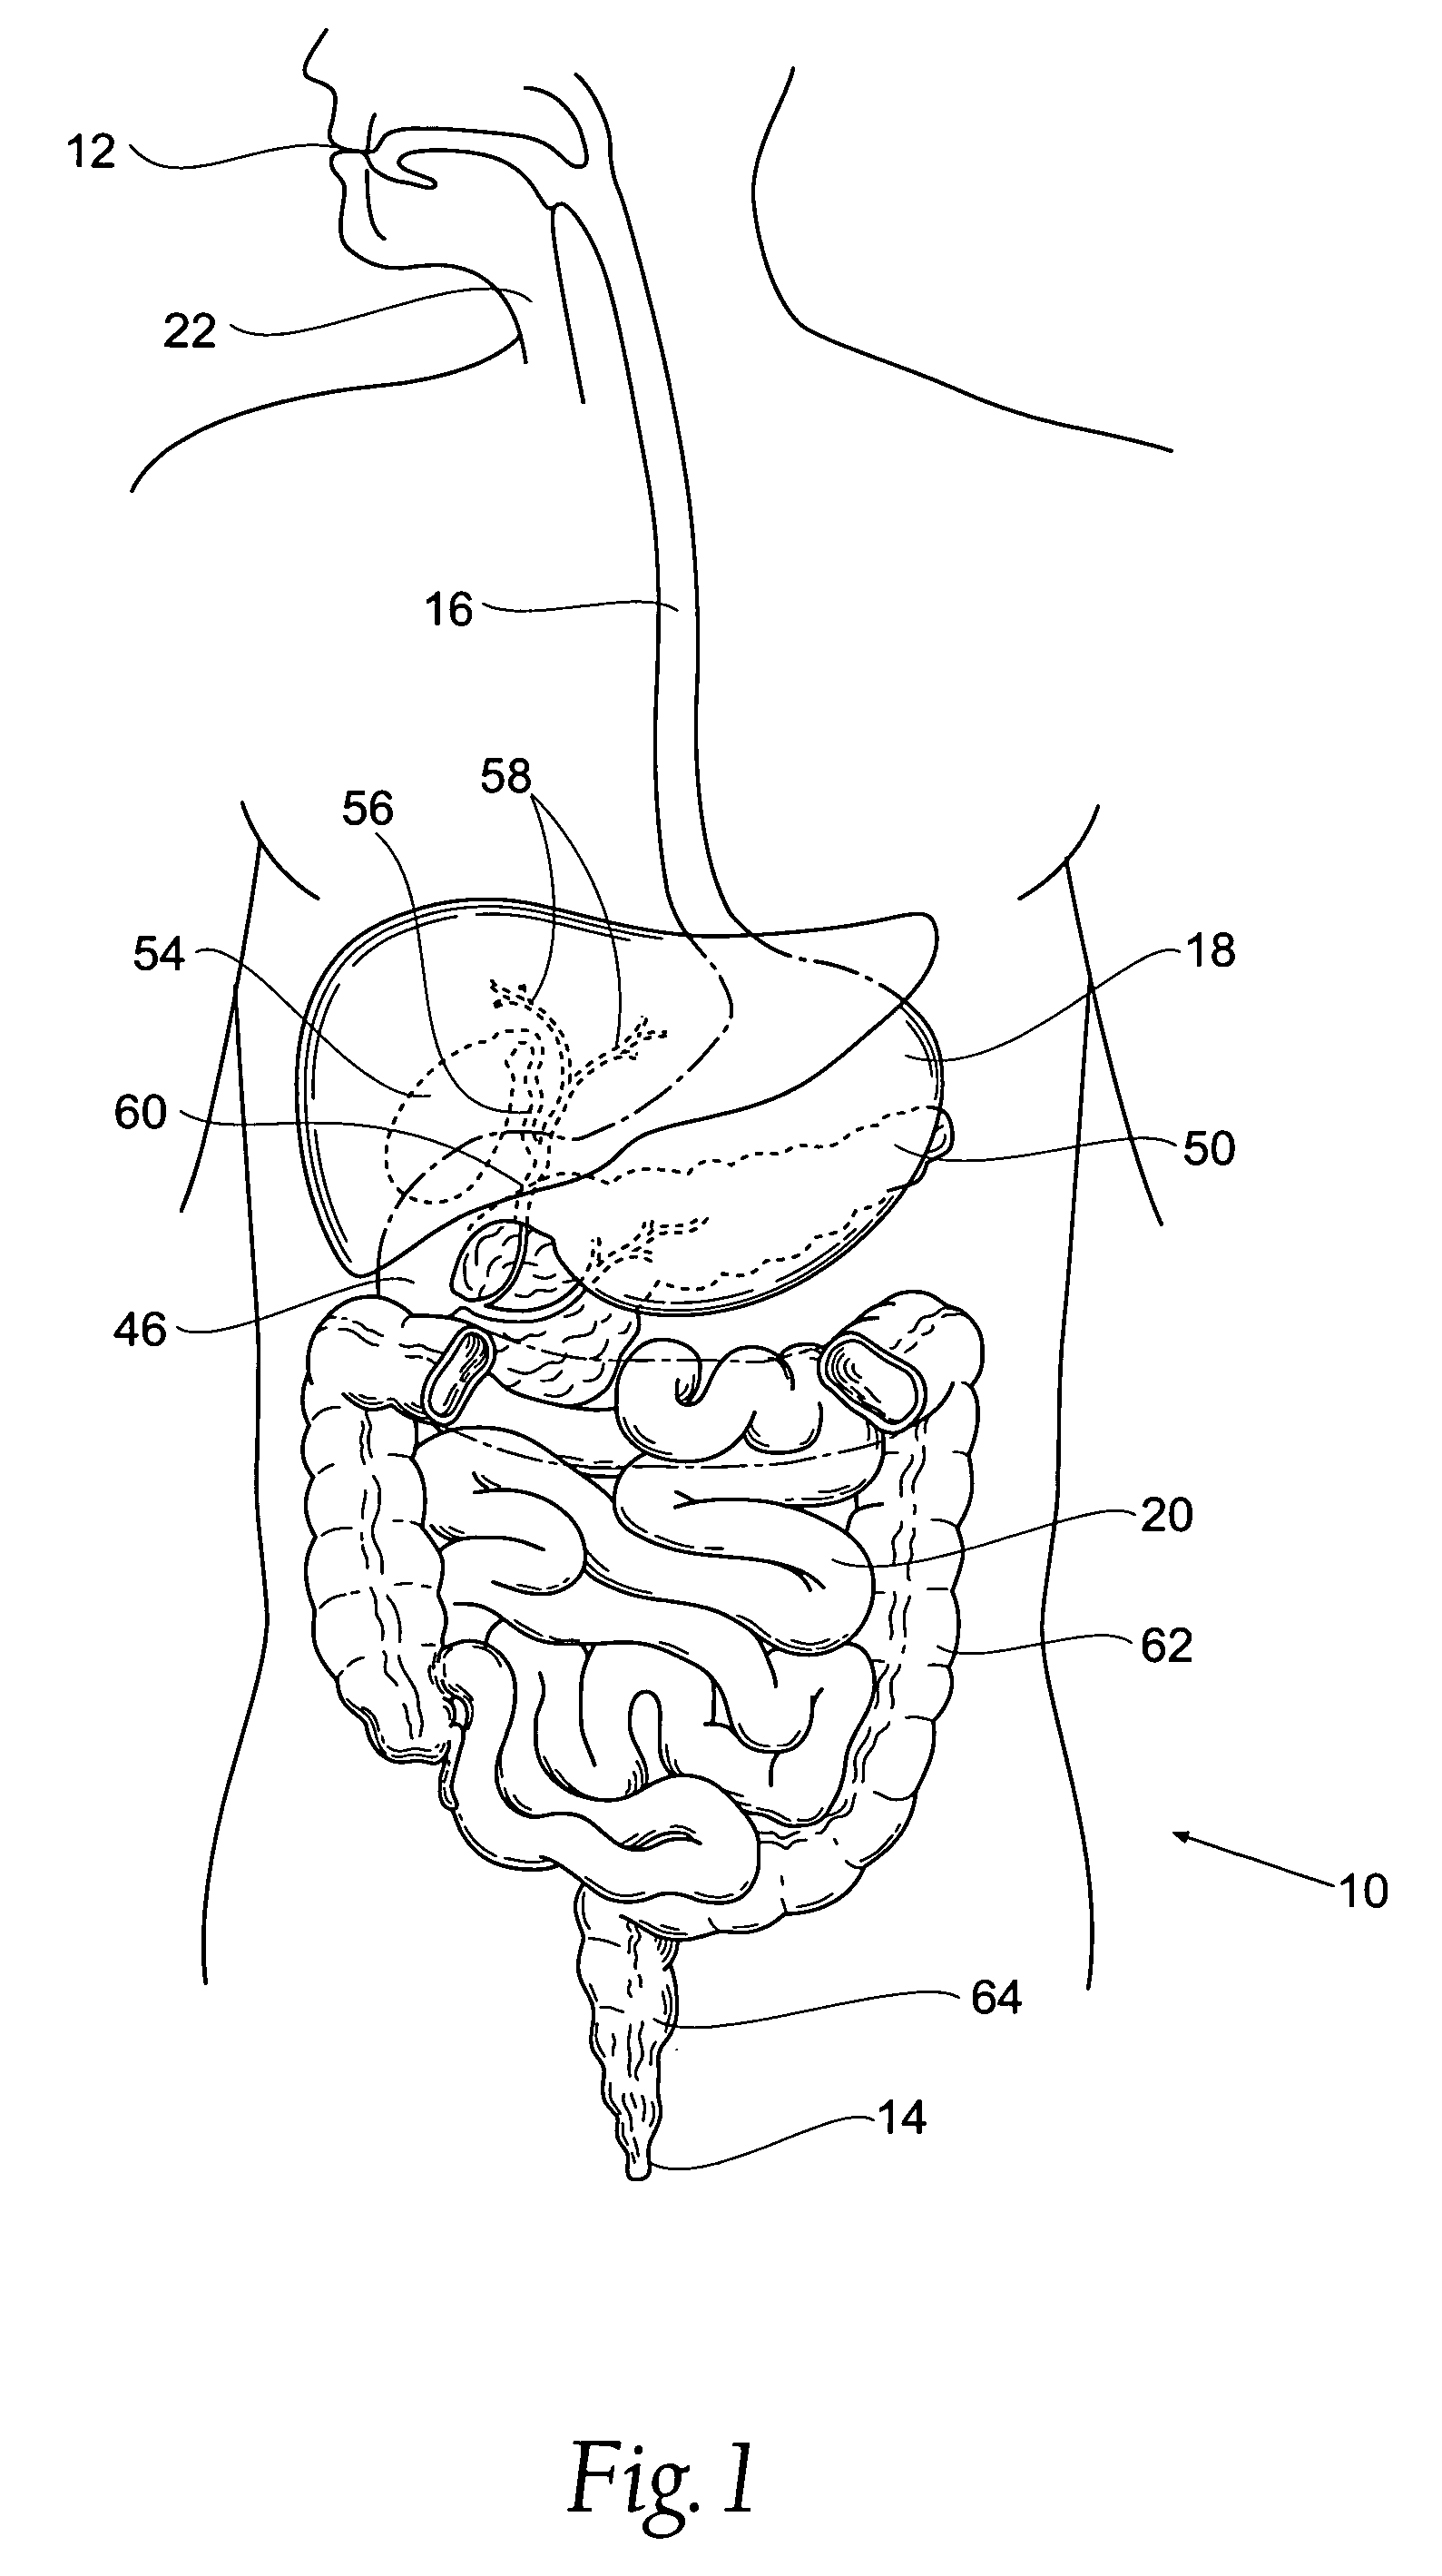 Systems and methods for treating obesity and other gastrointestinal conditions